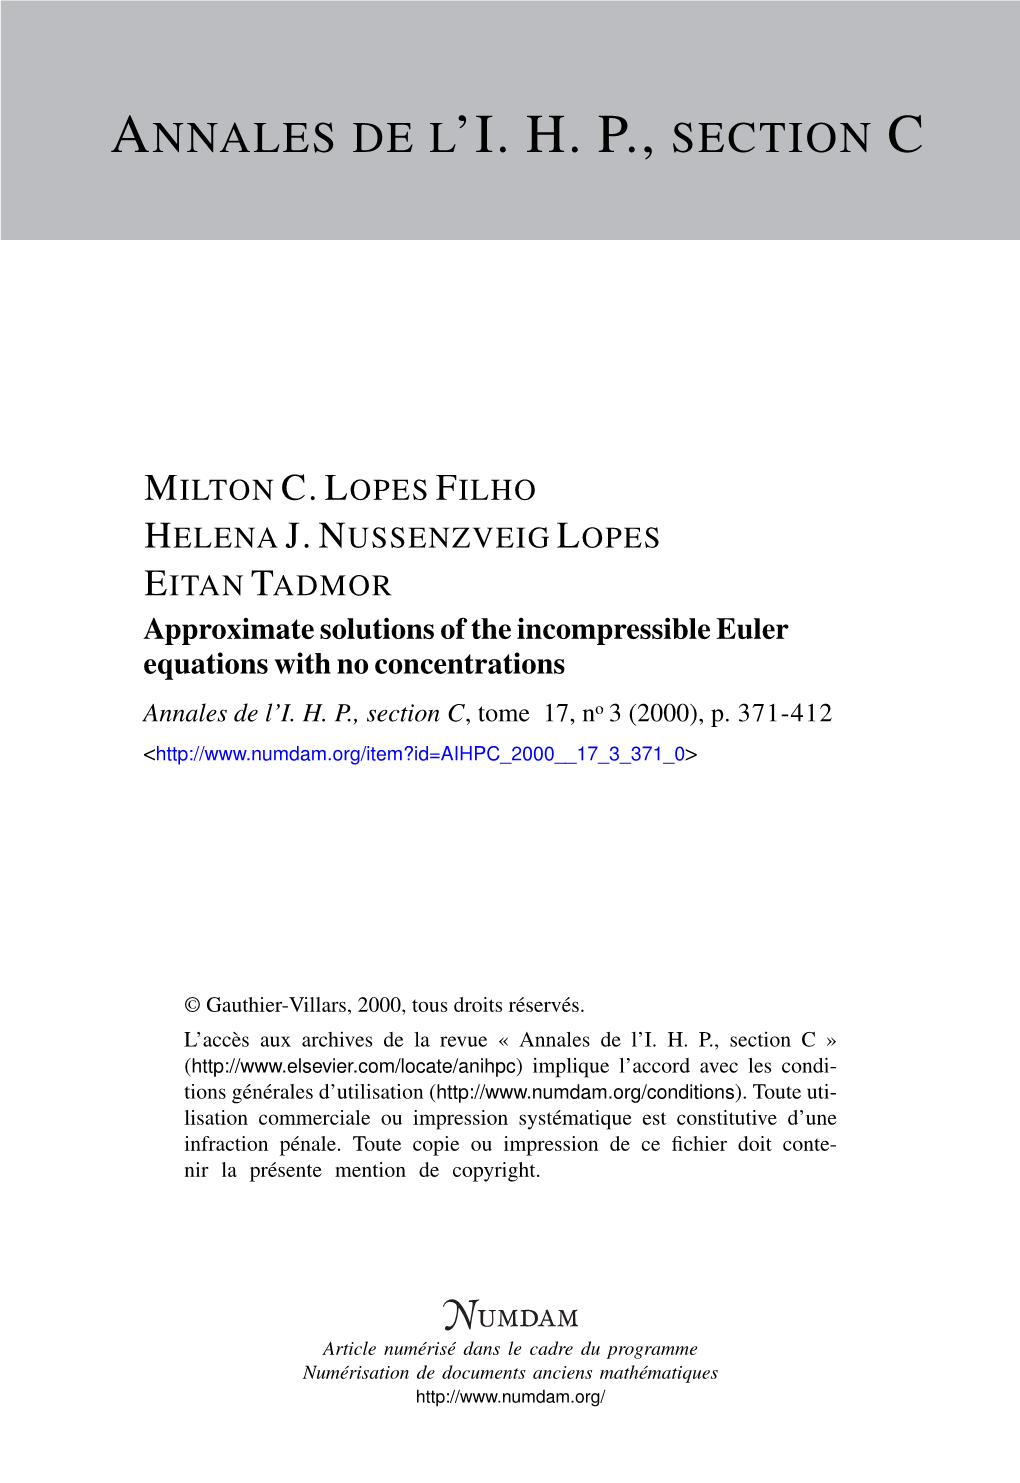 Approximate Solutions of the Incompressible Euler Equations with No Concentrations Annales De L’I